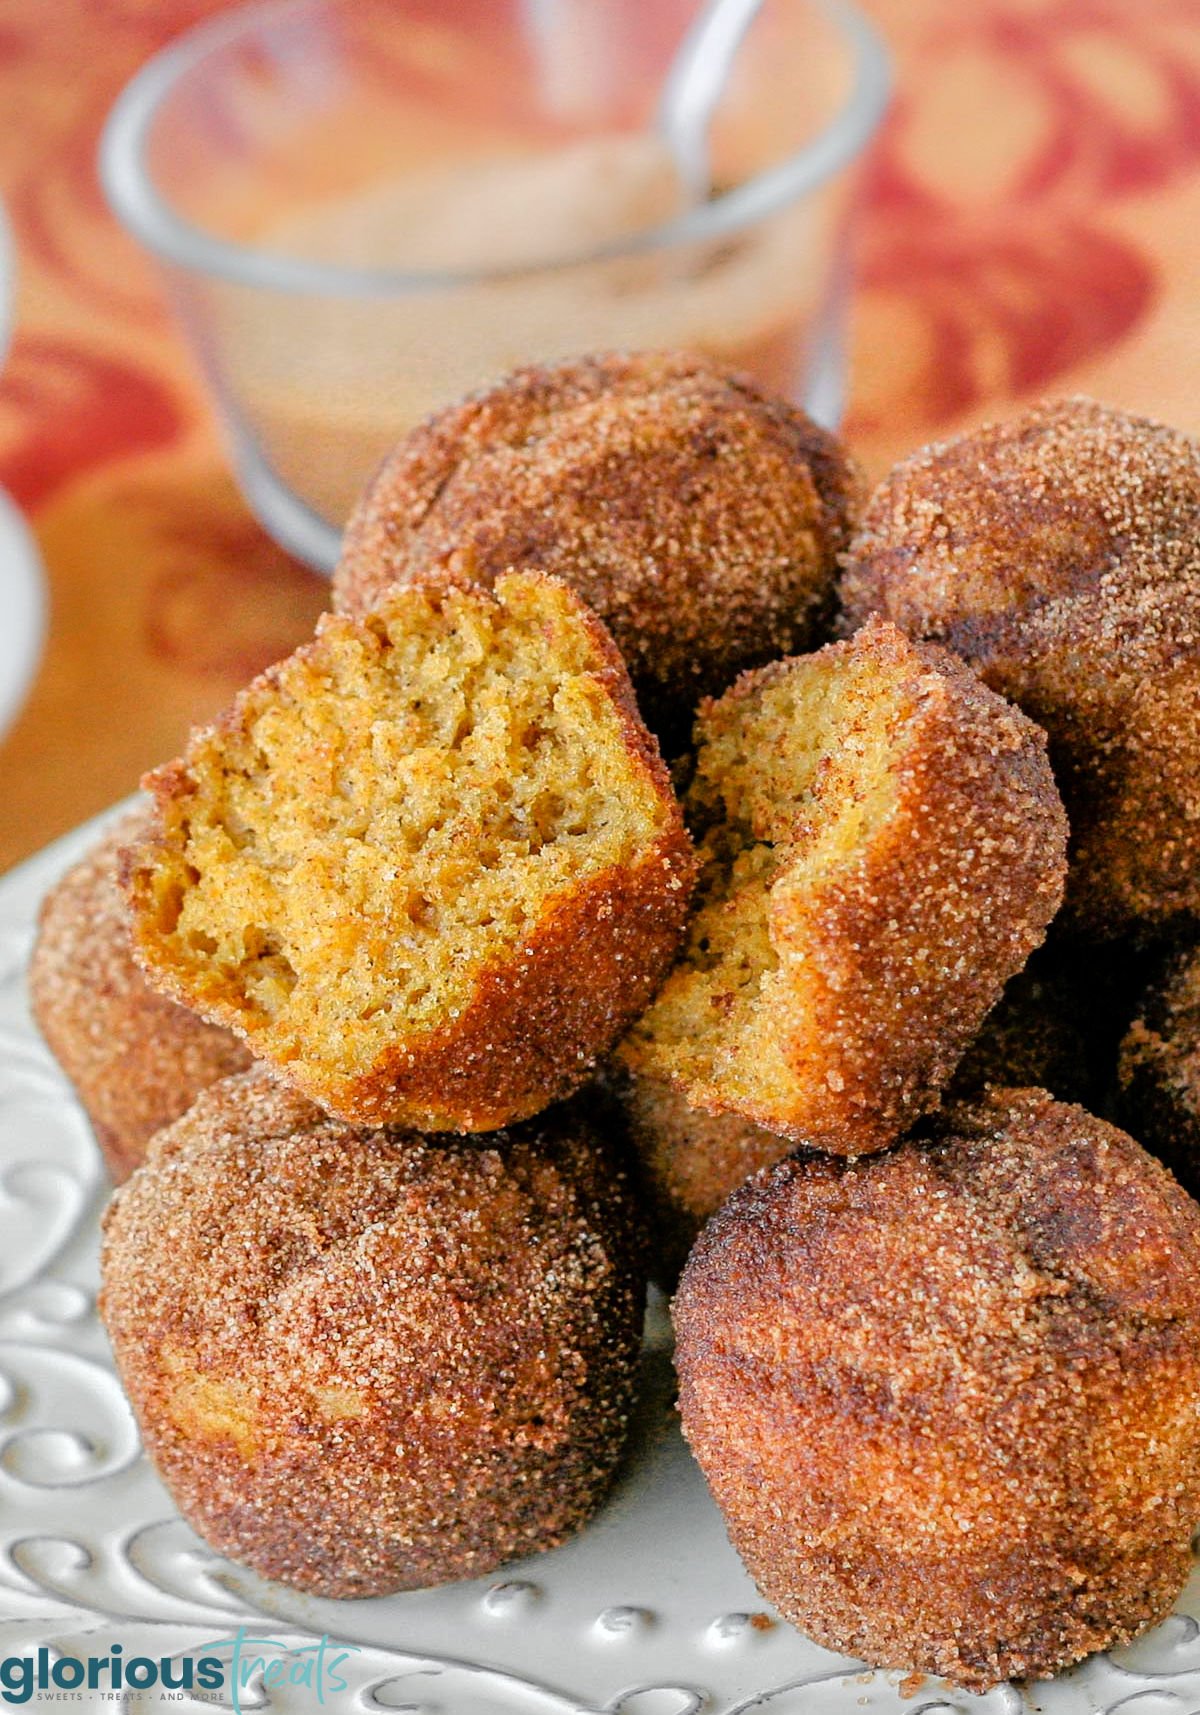 white metal pate is topped with a mound of pumpkin mini muffins rolled in cinnamon sugar so they look like donut holes. top muffin has been torn in half.